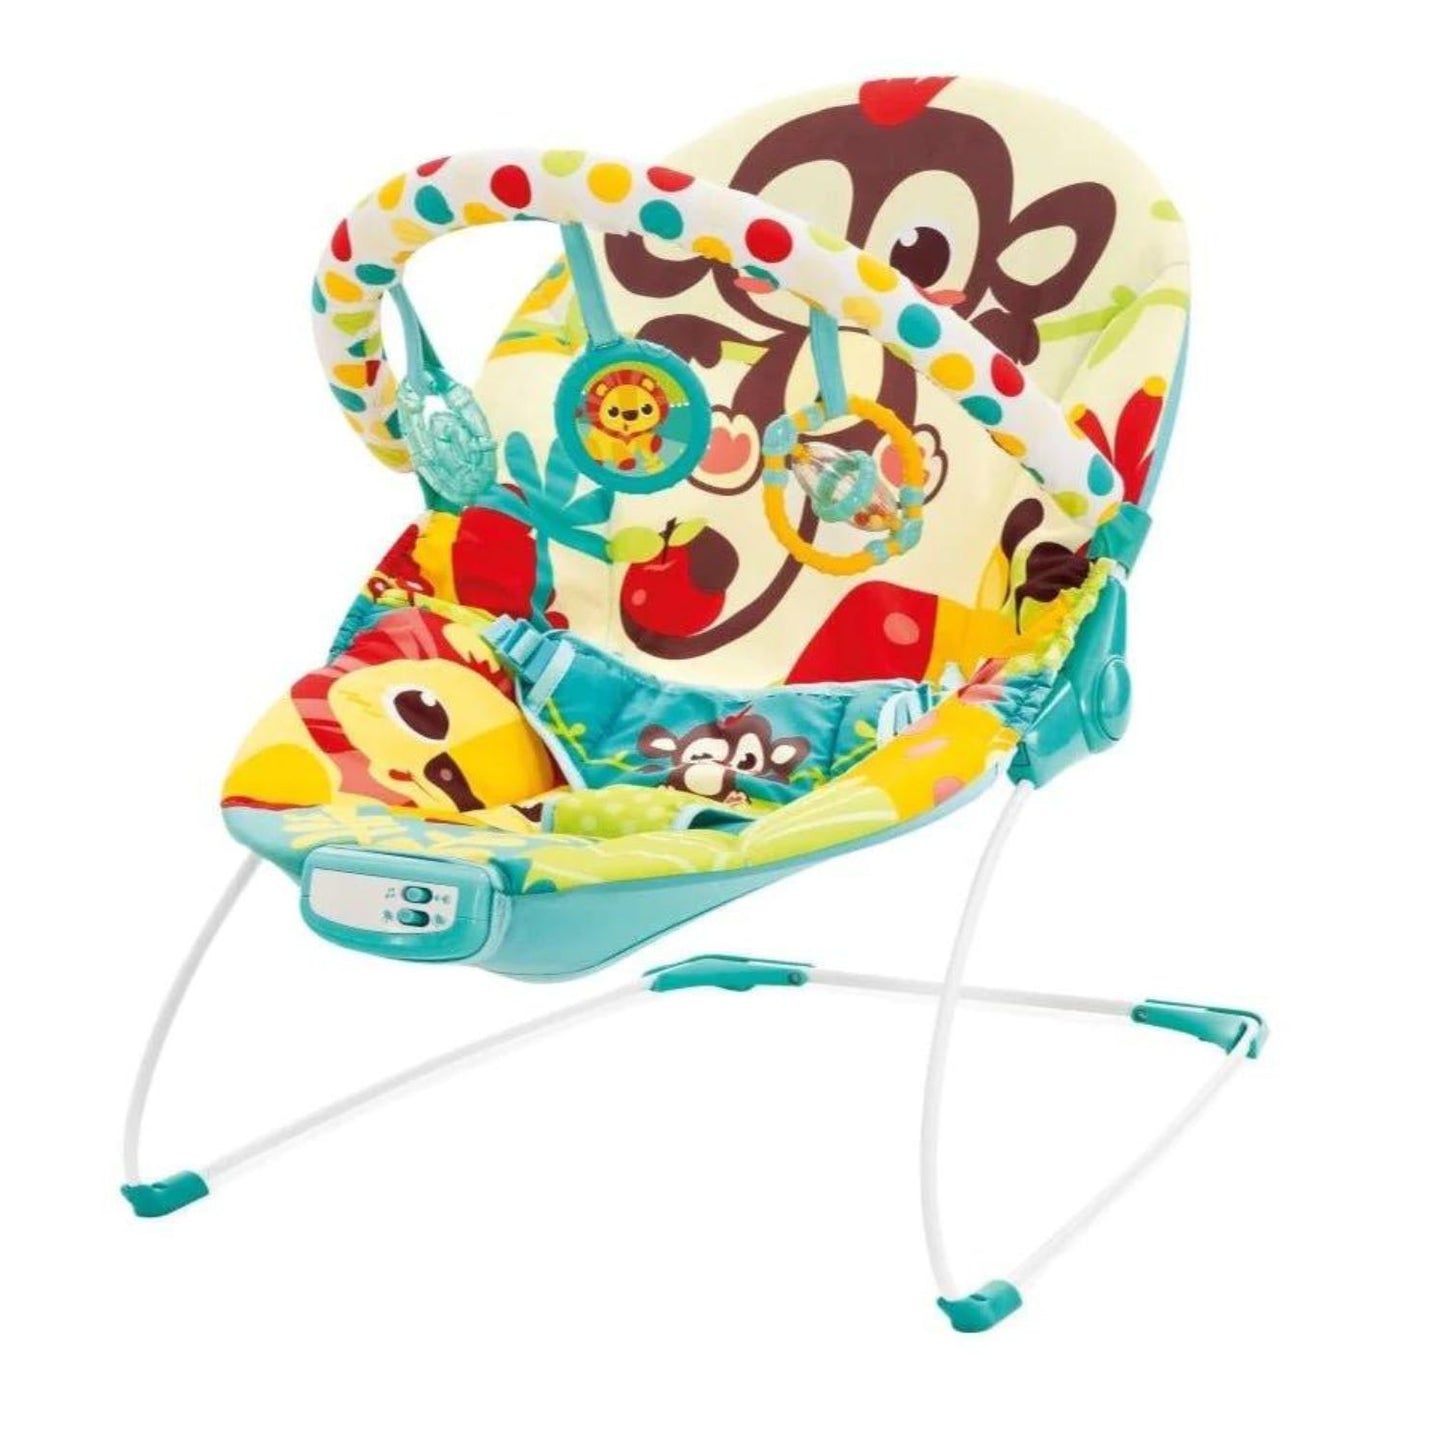 Mastela Electronic Baby Rocker Musical Bouncer Chair 6876, Soothing Vibrations, Toddlers to Newborn, Multicolor